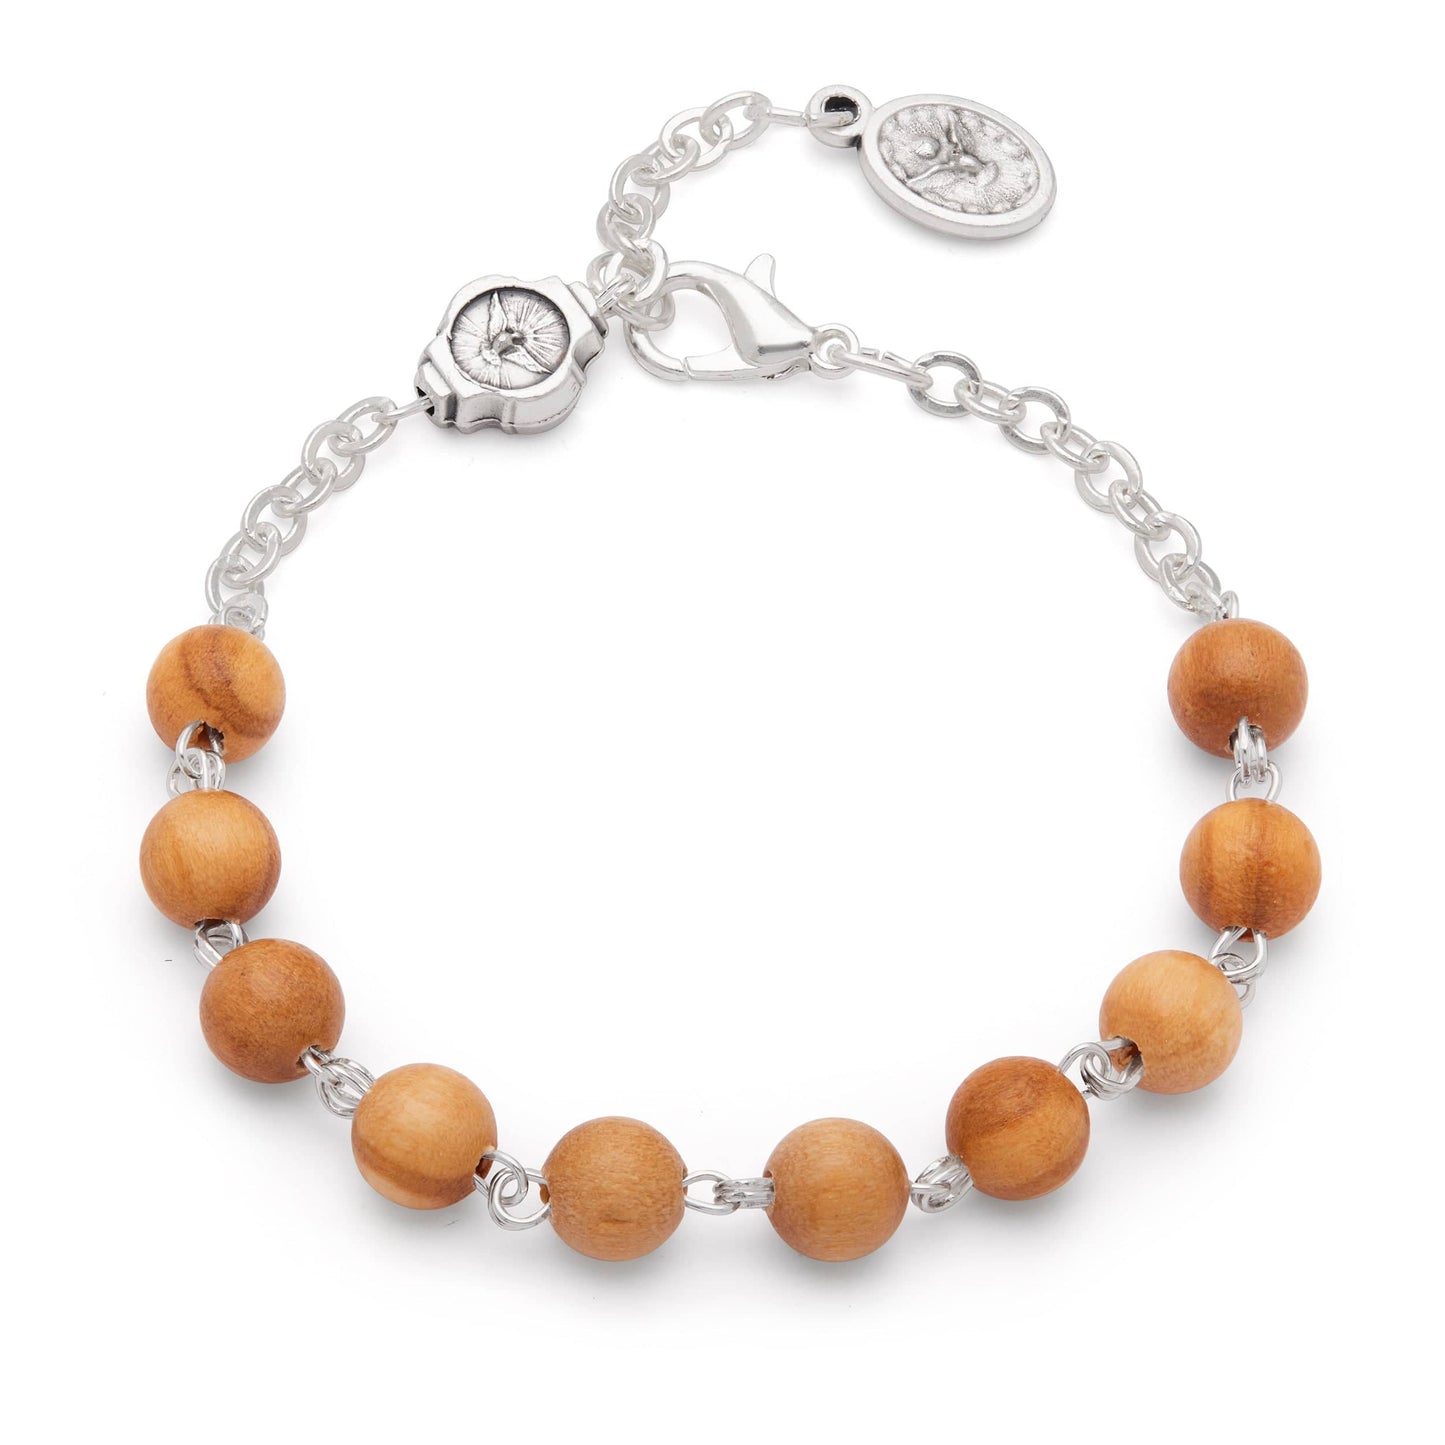 Mondo Cattolico 20 cm (7.9 in) / 6.5 mm (0.26 in) Bracelet in round olive beads with the Holy Spirit Medal